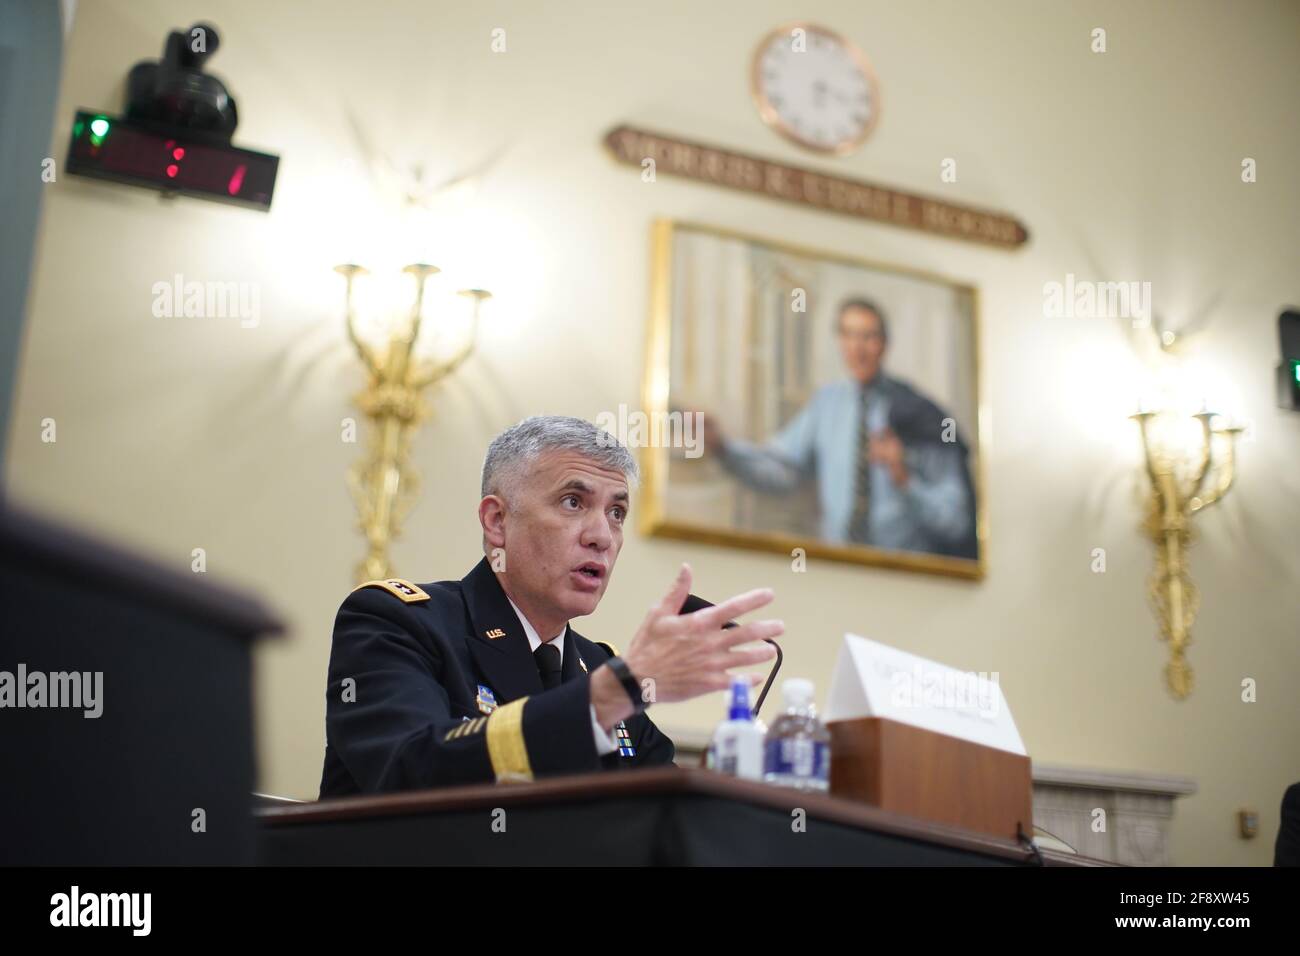 Washington, USA. 15th Apr, 2021. Paul Nakasone, director of the National Security Agency (NSA) and commander of the U.S. Cyber Command, speaks during a House Intelligence Committee hearing in Washington, DC, U.S., on Thursday, April 15, 2021. The hearing follows the release of an unclassified report by the intelligence community detailing the U.S. and its allies will face 'a diverse array of threats' in the coming year, with aggression by Russia, China and Iran. Photo by Al Drago/Pool/Sipa USA Credit: Sipa USA/Alamy Live News Stock Photo